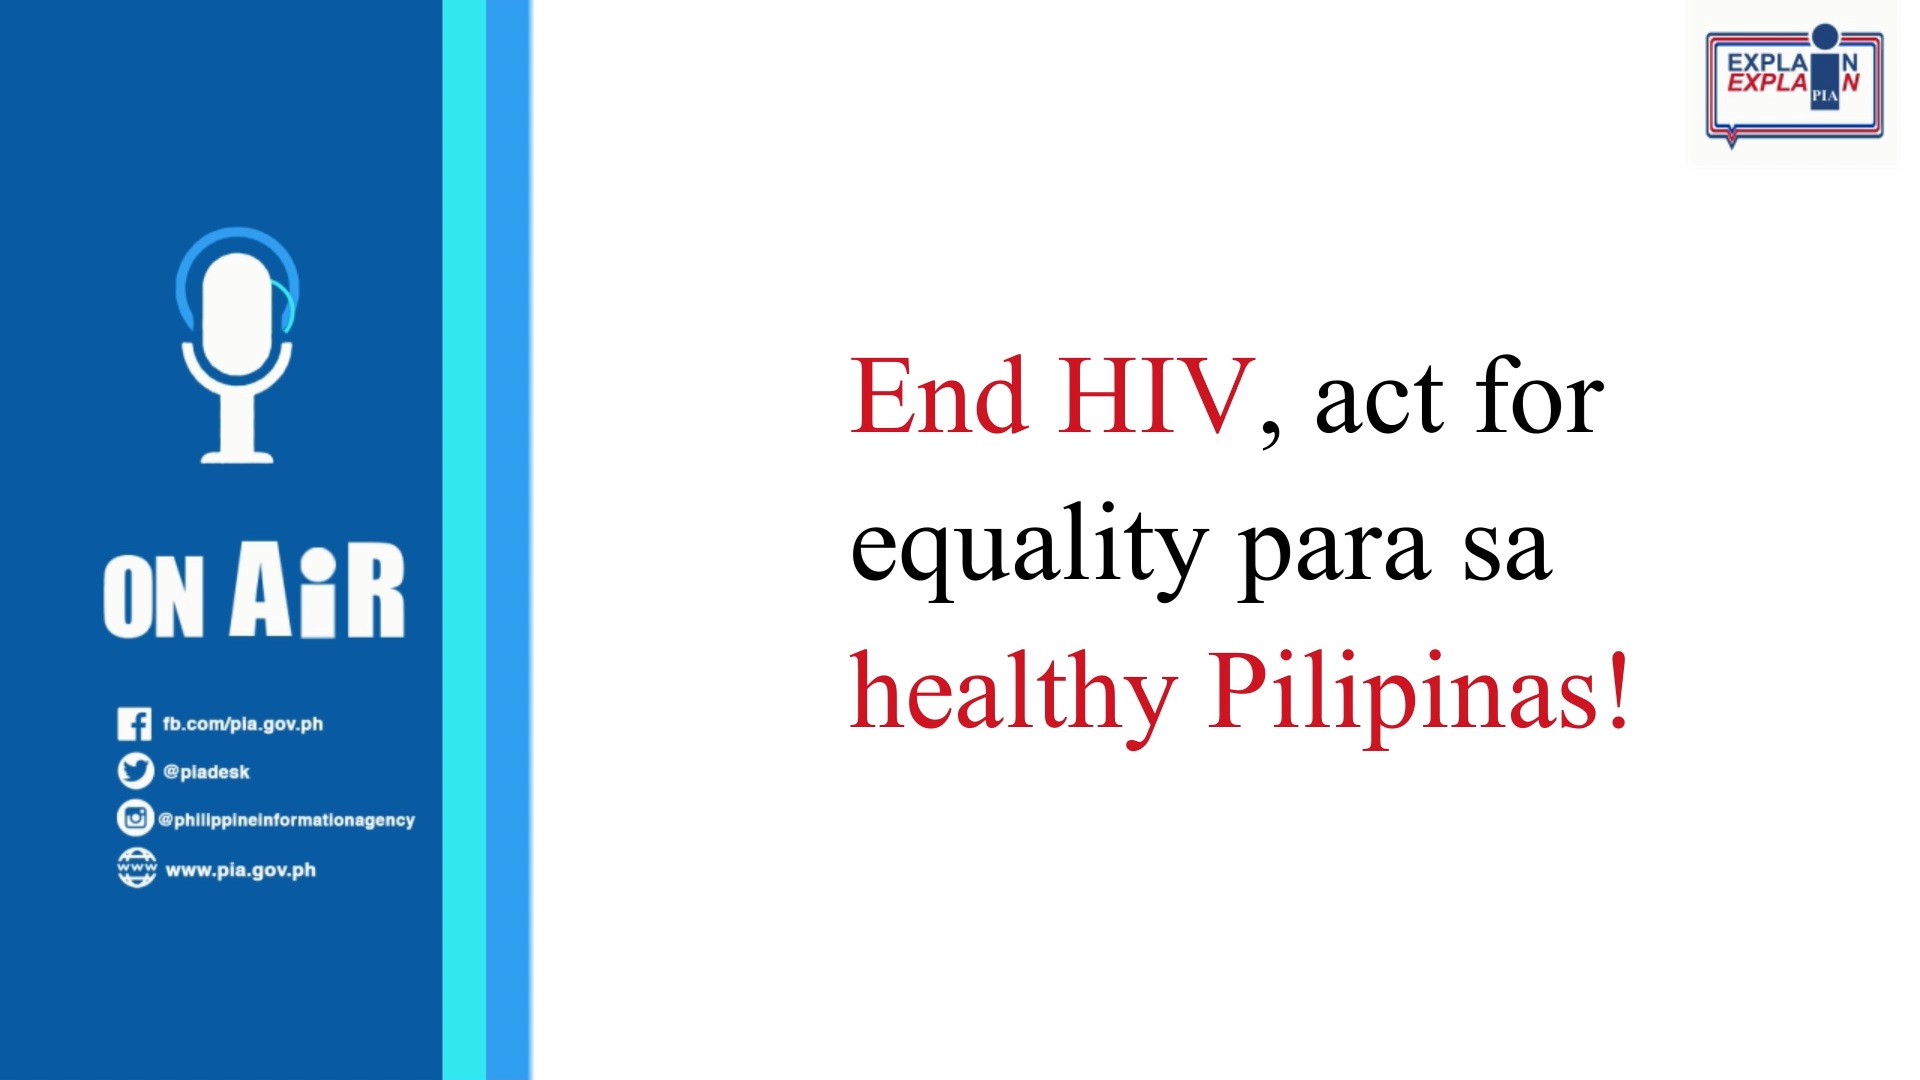 PIA ON AIR | World AIDS Day